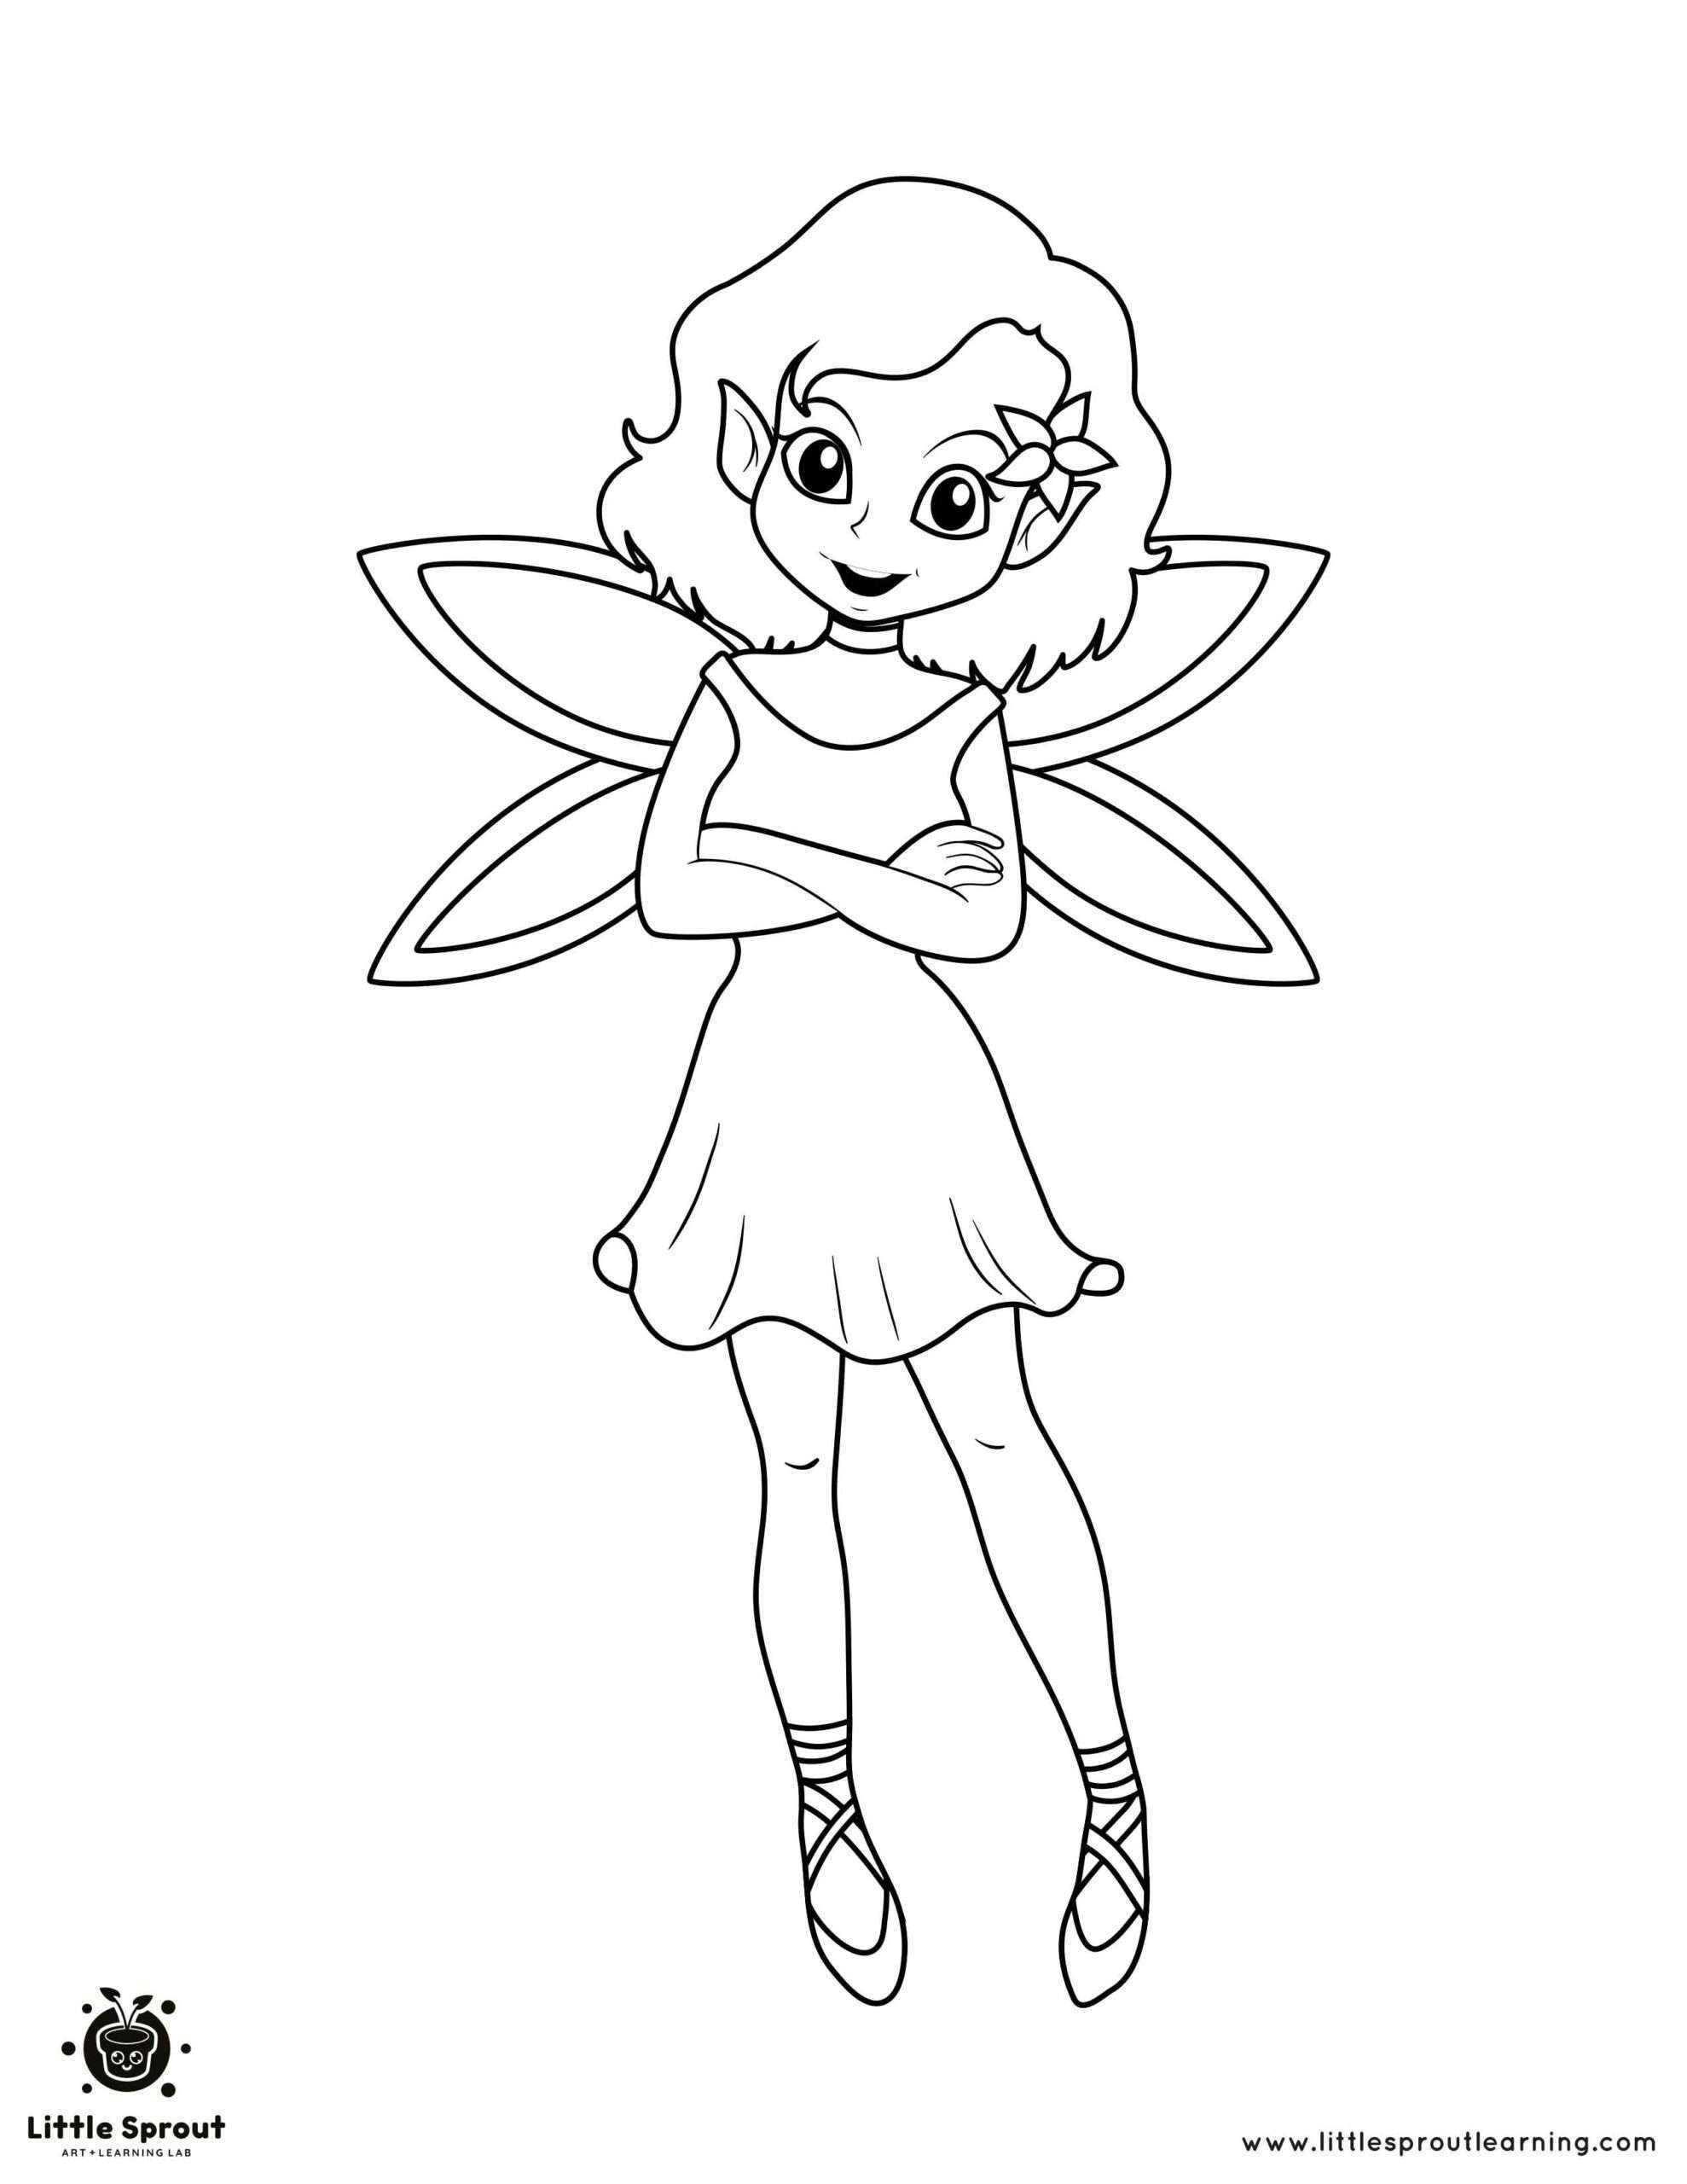 You Don’t Say? Fairy Coloring Page